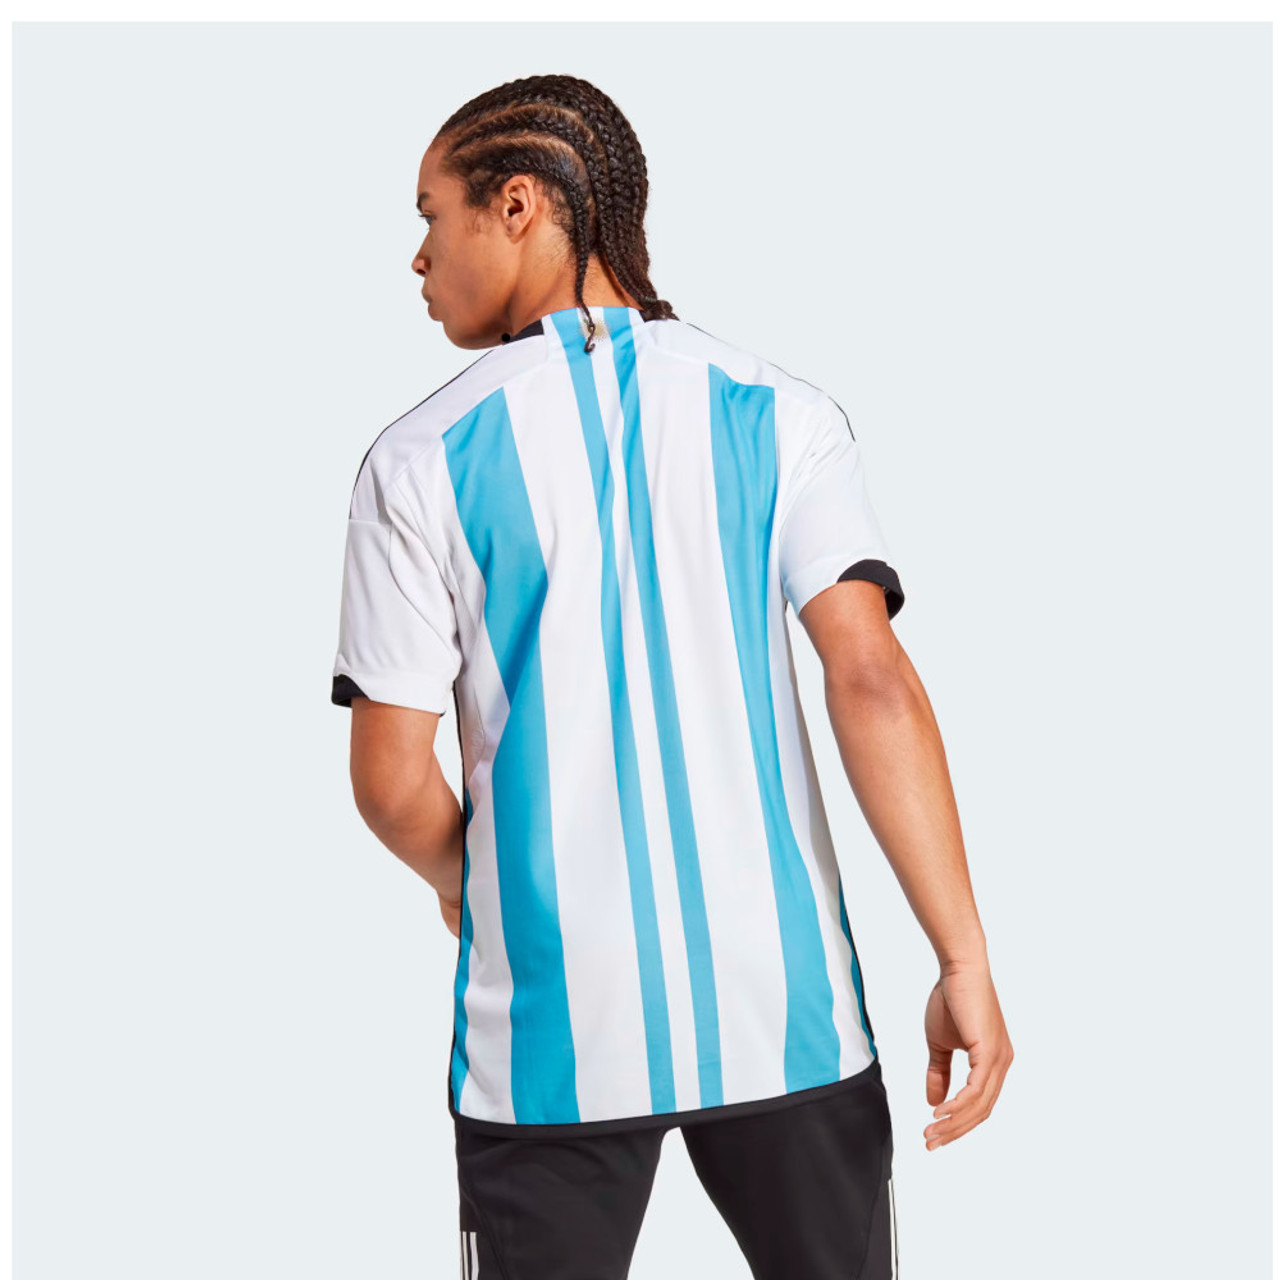 Update: Adidas/Nike to Release Argentina/France 3 Stars Kit In